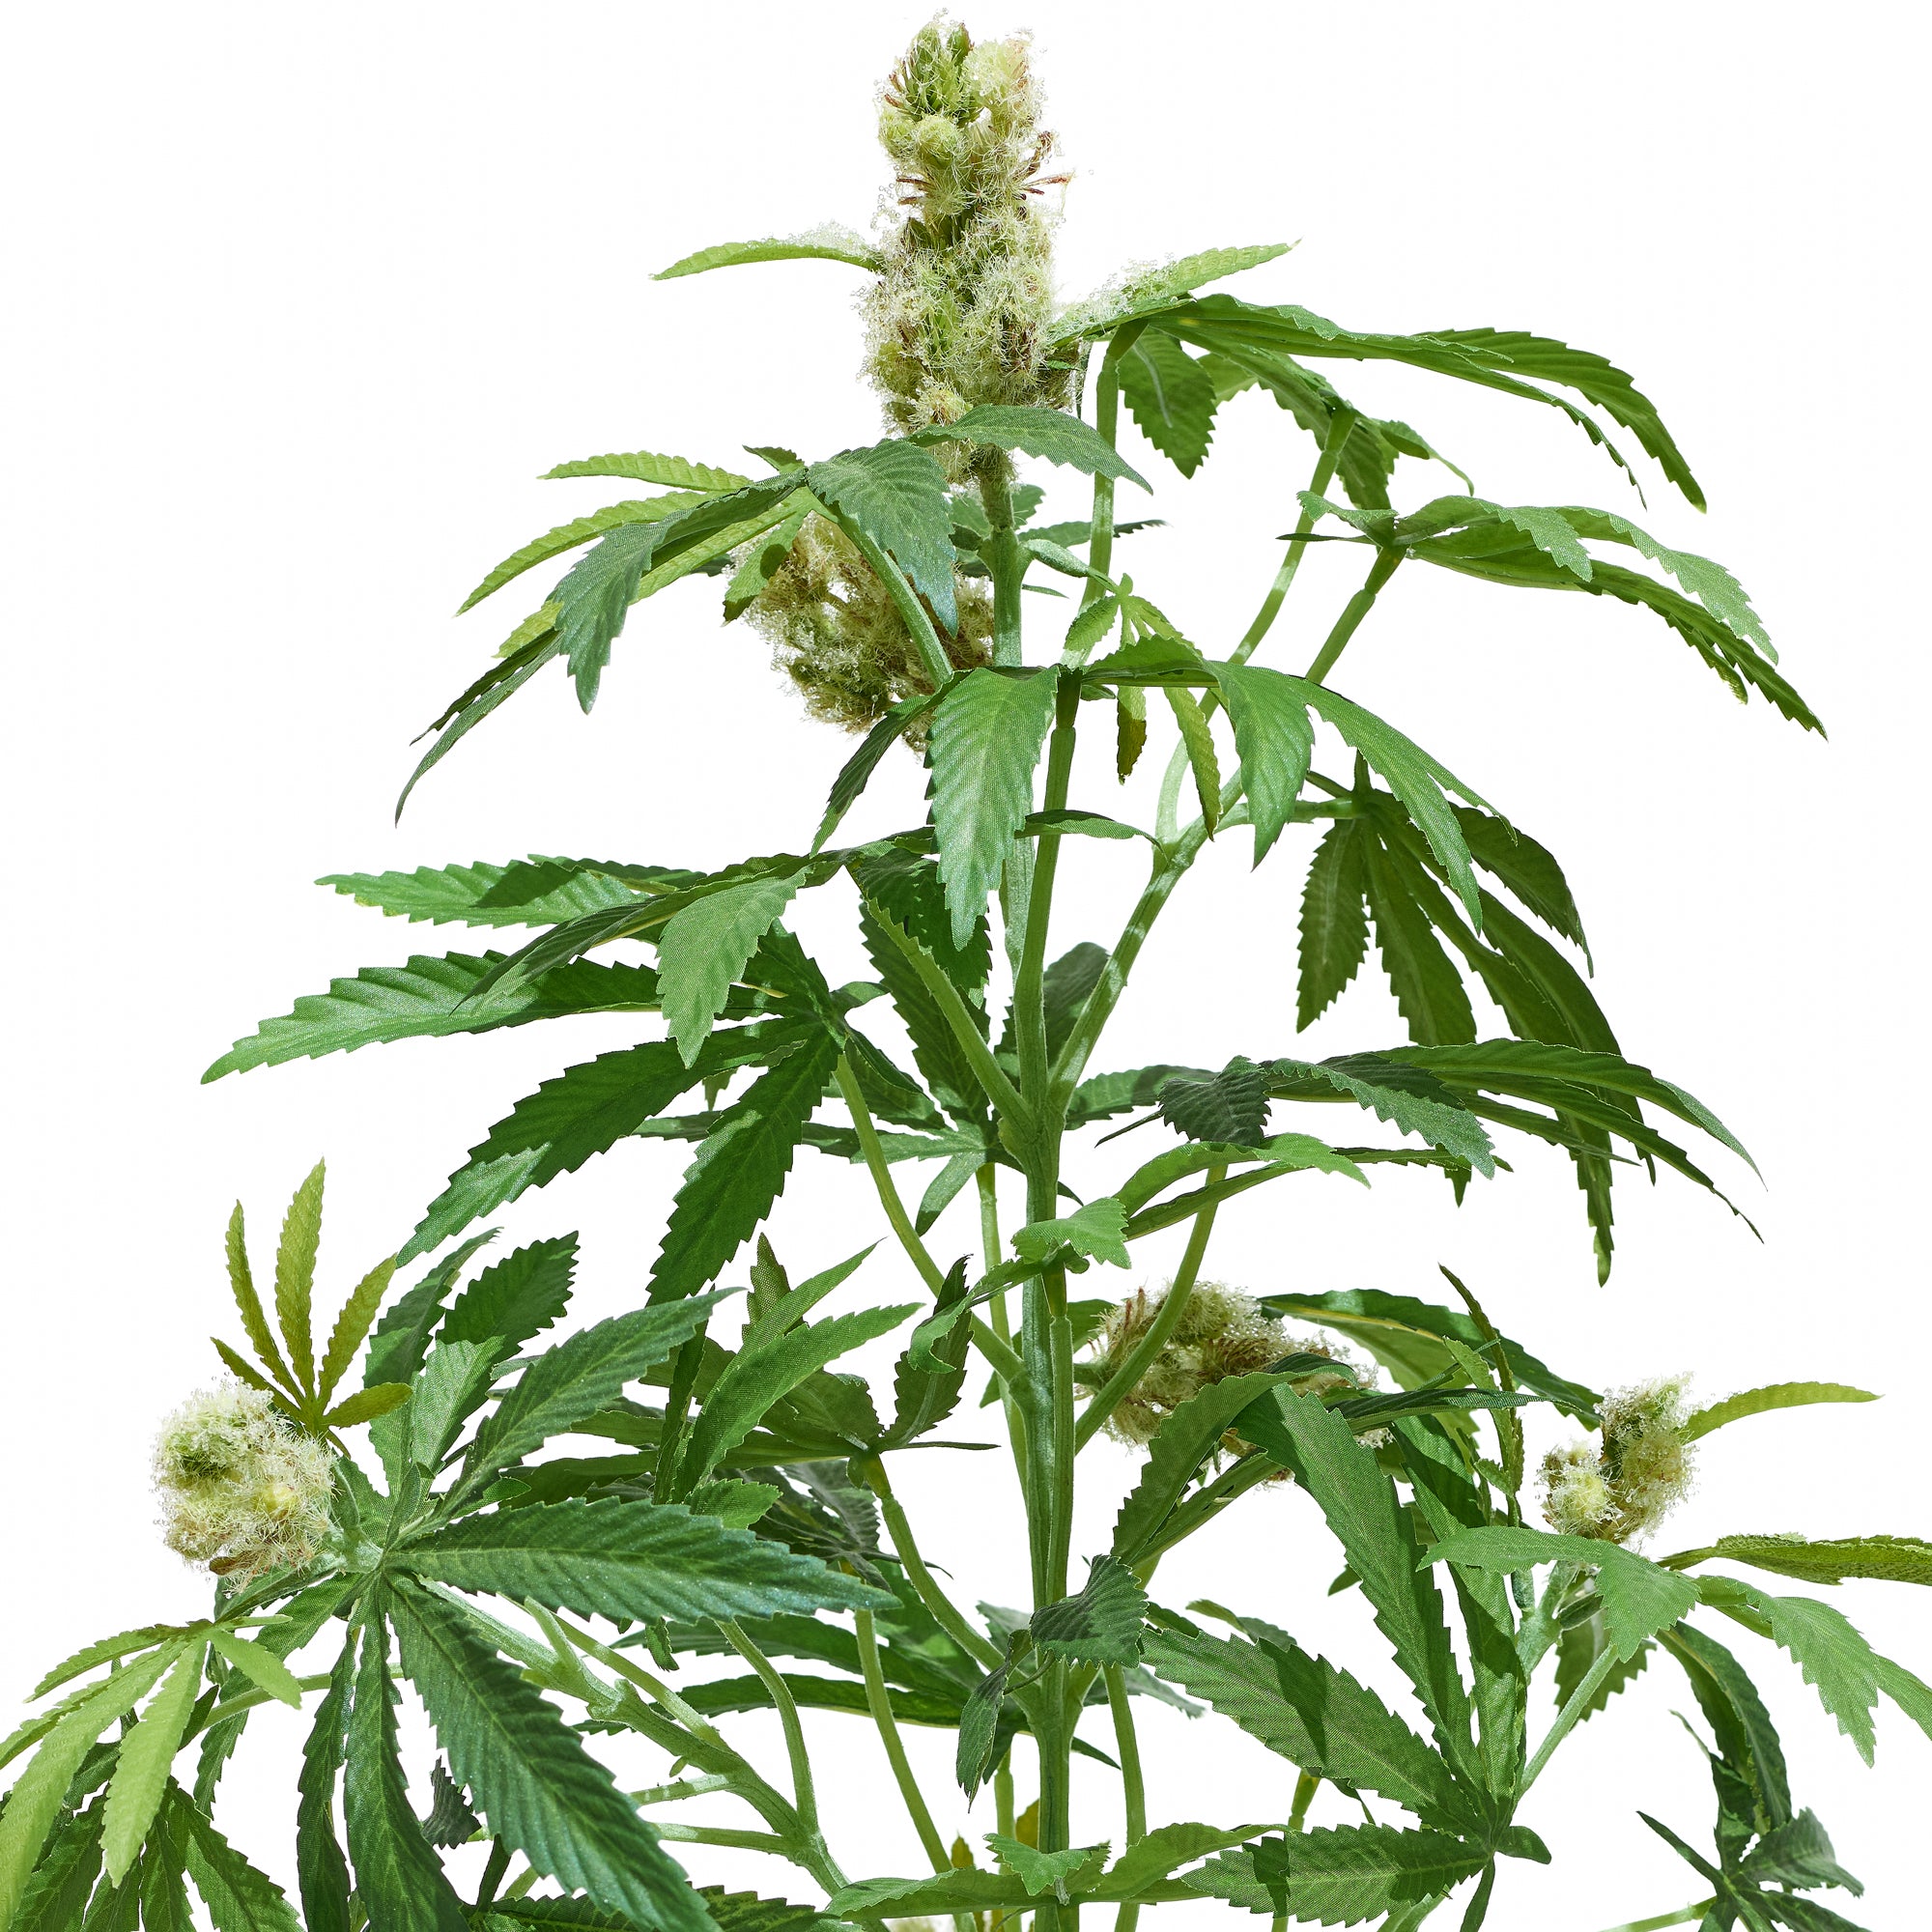 weed plant png